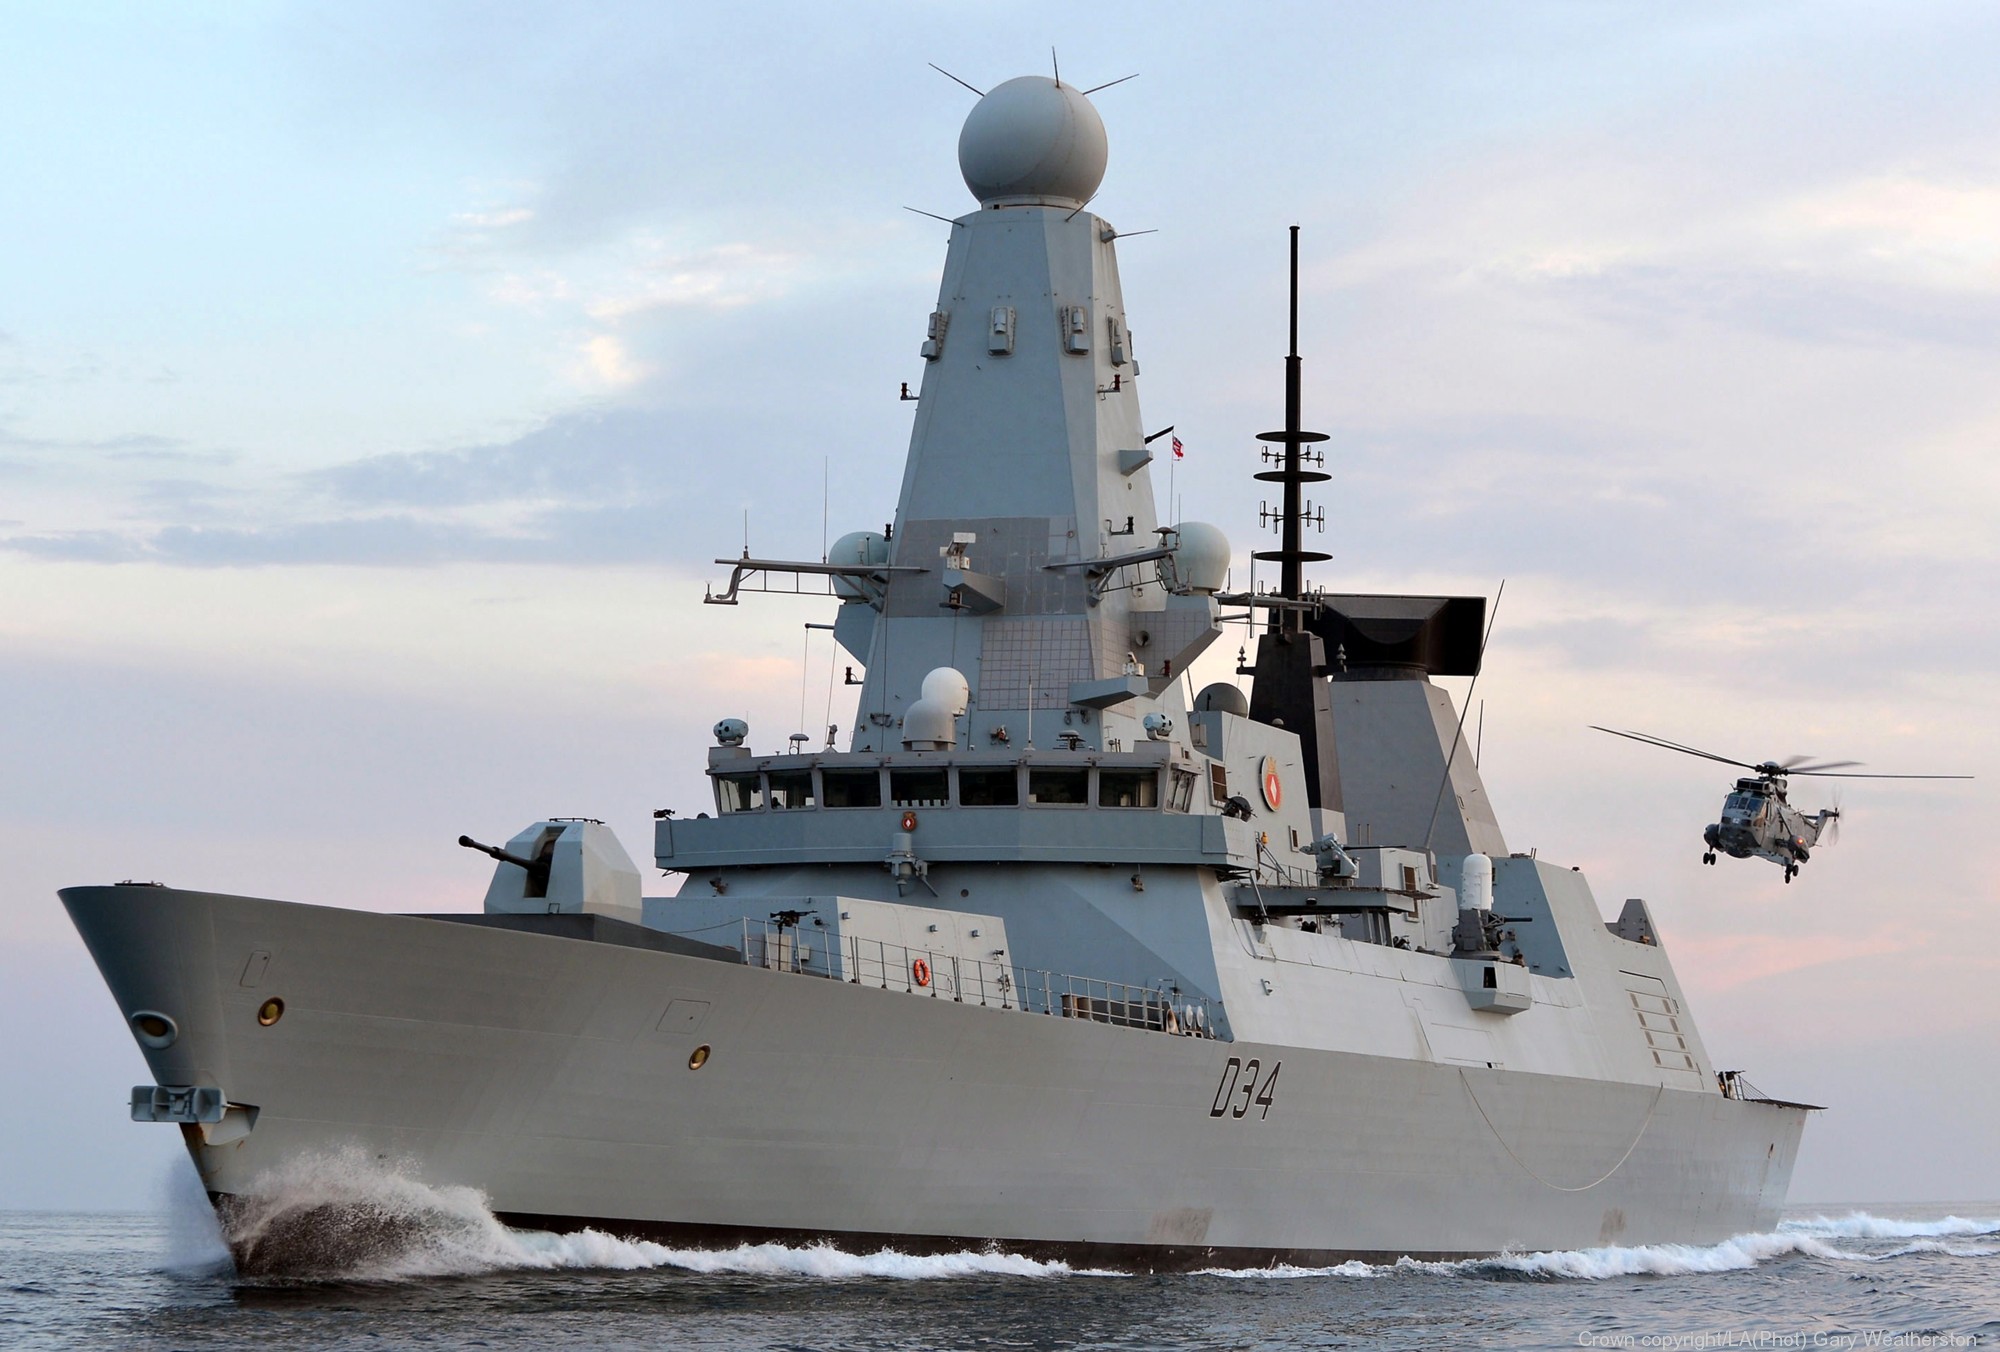 hms diamond d-34 type 45 daring class guided missile destroyer ddg royal navy sea viper paams 16